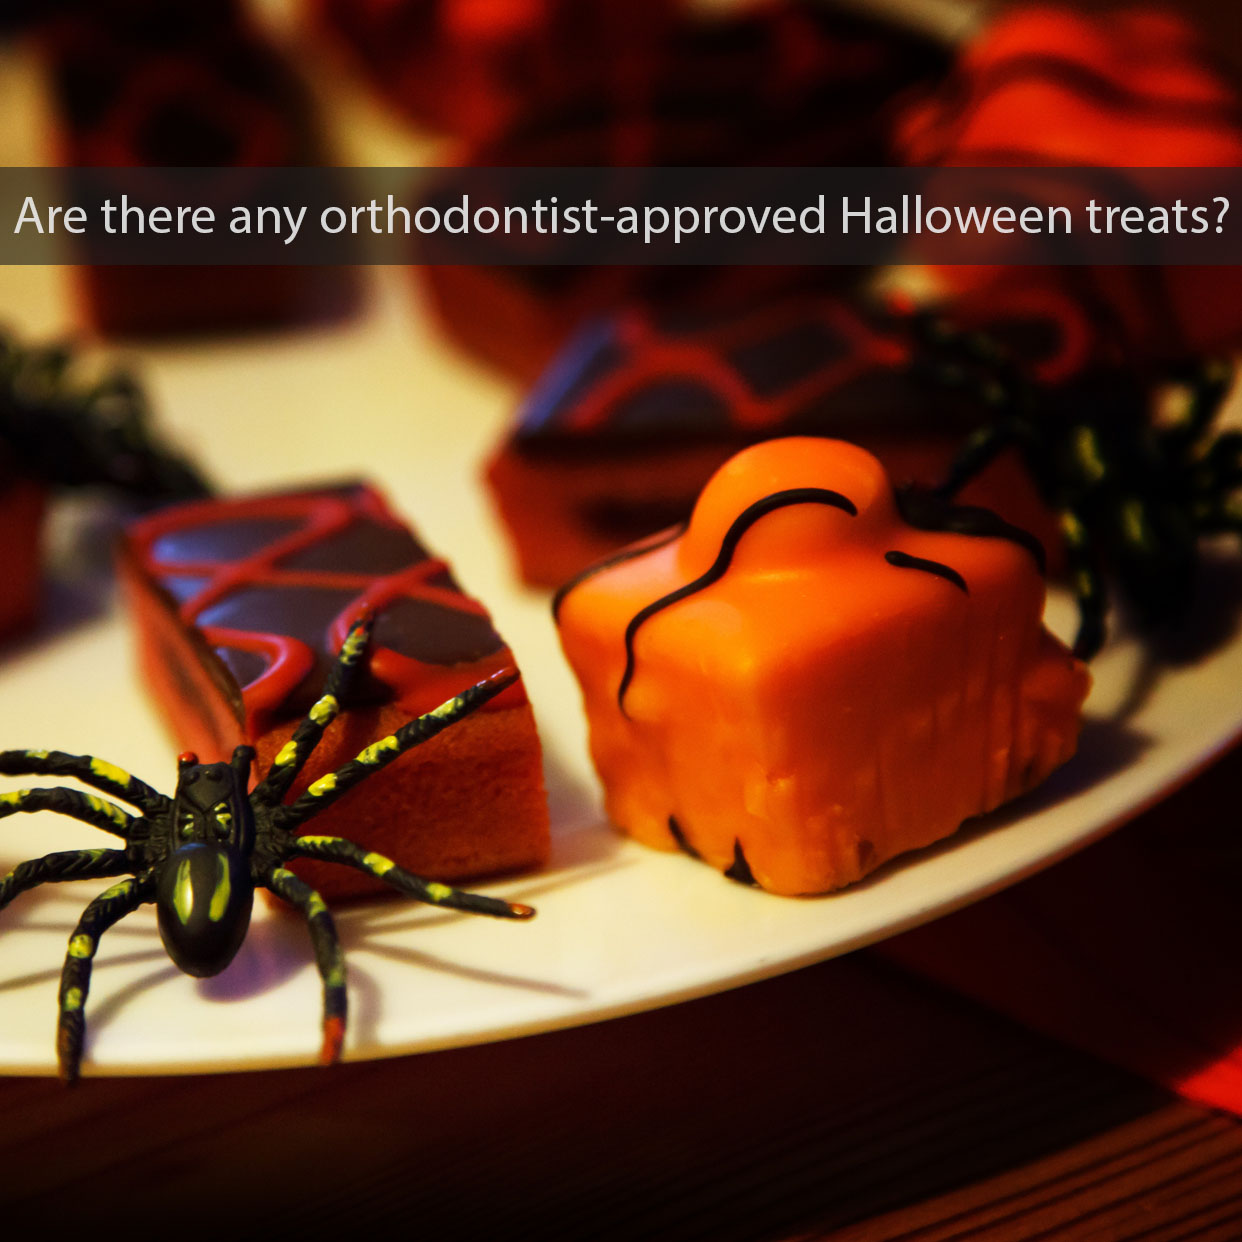 Are there any orthodontist-approved Halloween treats?